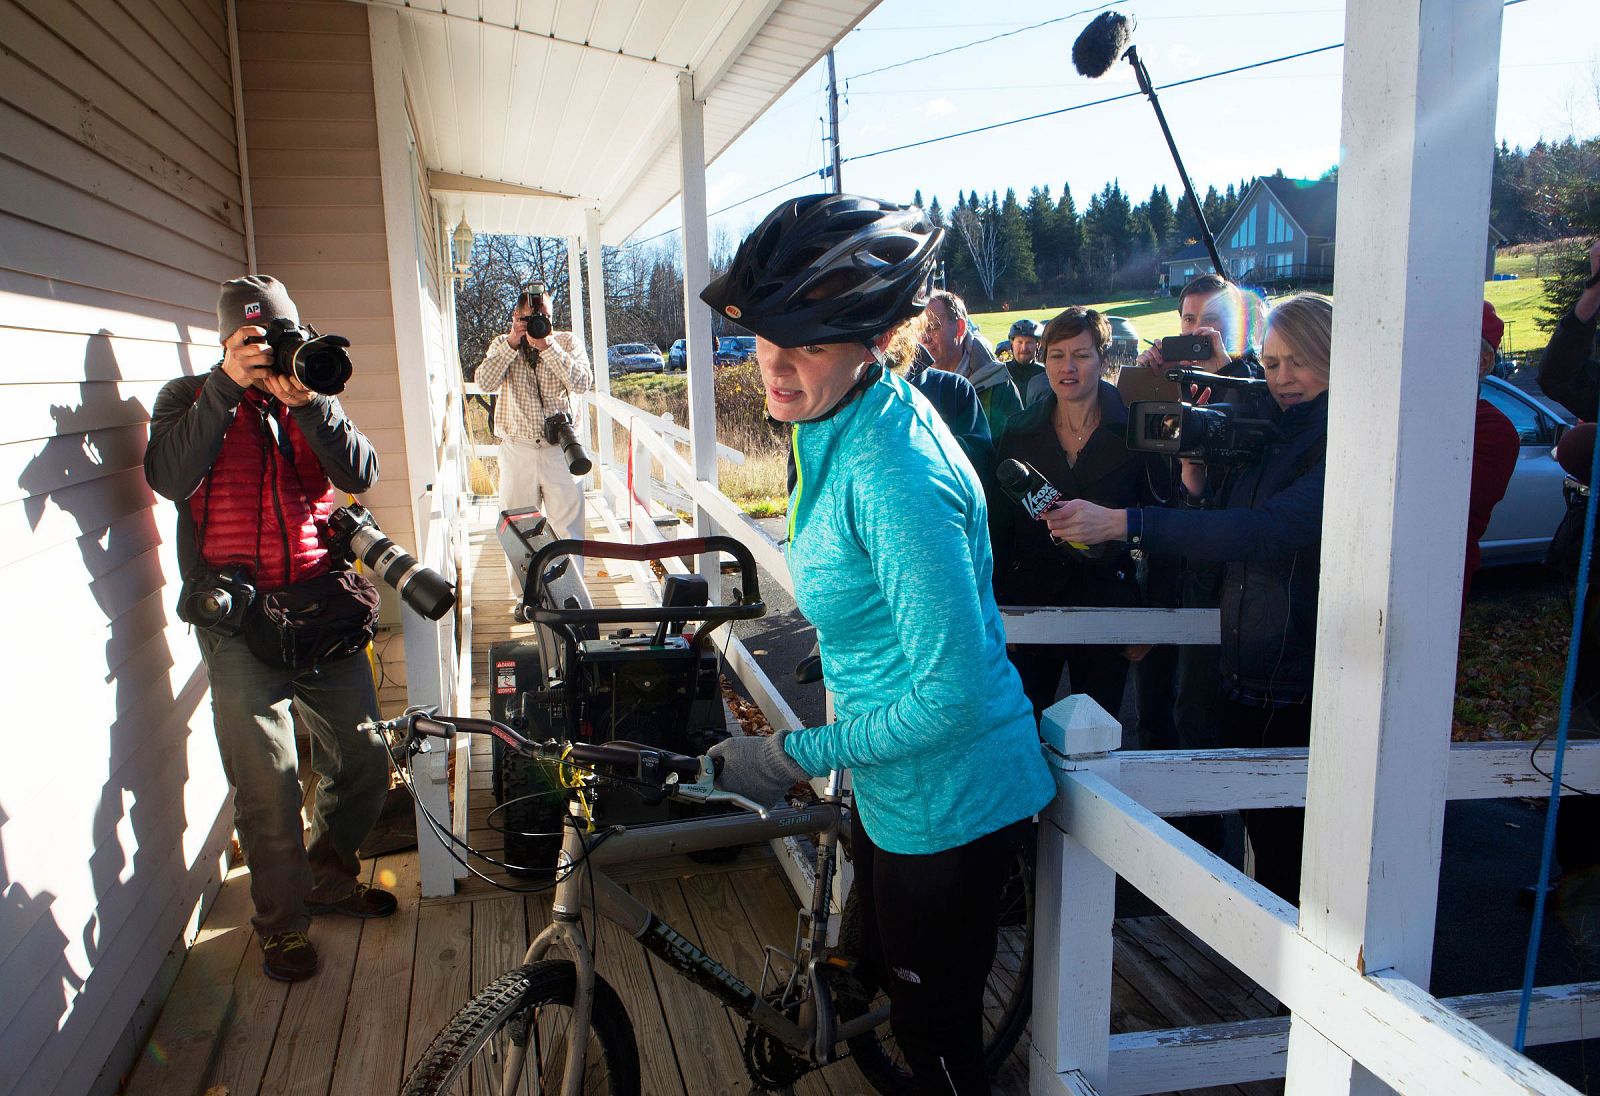 Kaci Hickox returns to her home surrounded by media after going for a bike ride with boyfriend Ted Wilbur in Fort Kent